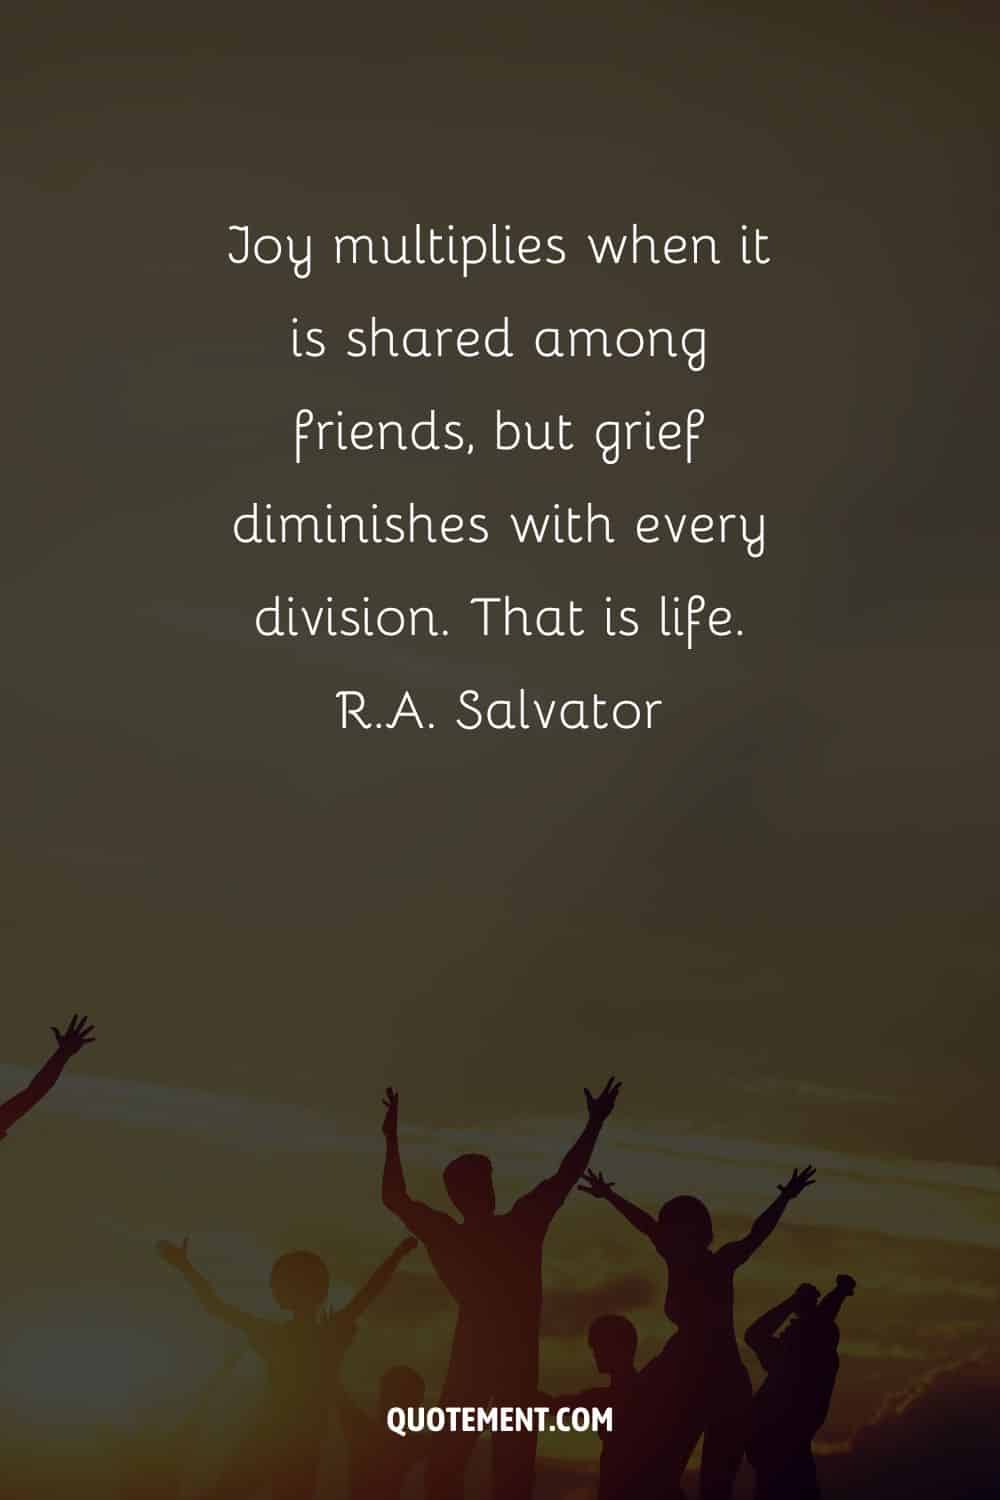 Joy multiplies when it is shared among friends, but grief diminishes with every division